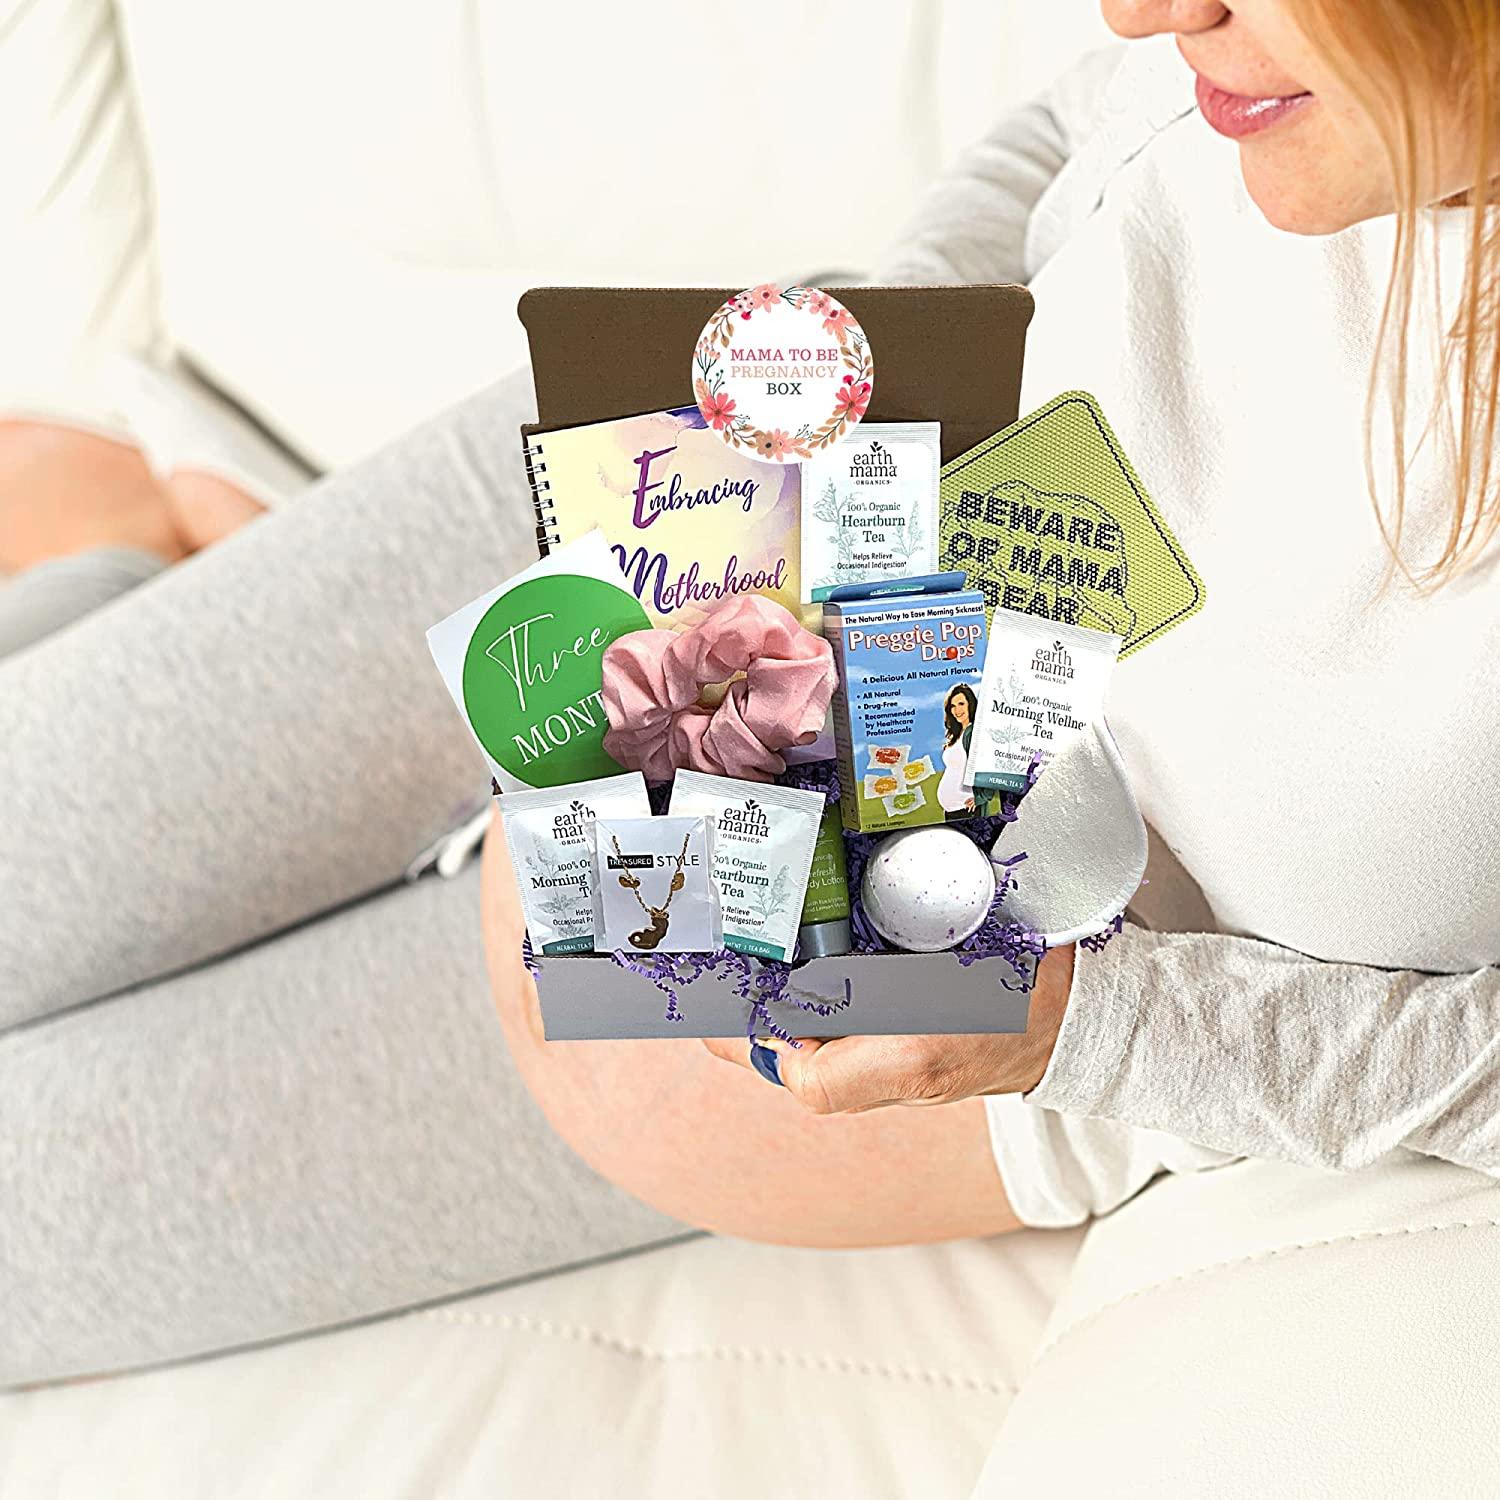 Ultimate New MOM Gifts, Care Package/Gift Basket, New Baby Gift, Expecting  Pregnant Women, Mother to be Baby Shower, Pregnancy or After Birth